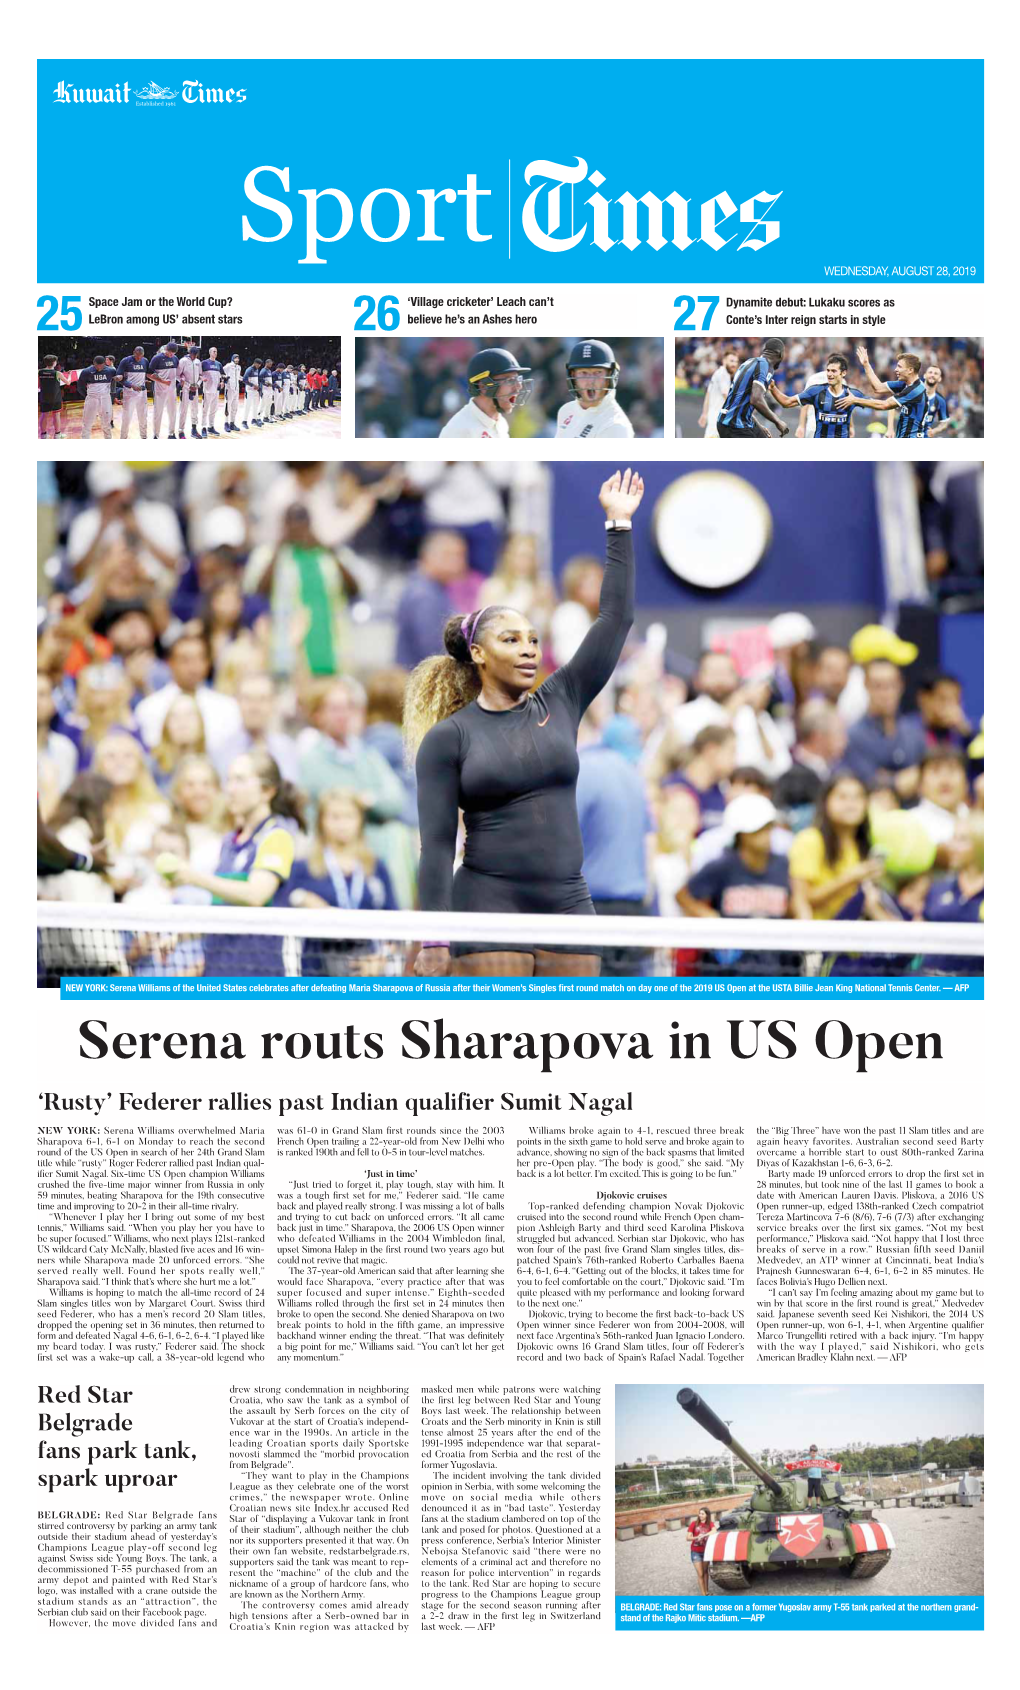 Serena Routs Sharapova in US Open ‘Rusty’ Federer Rallies Past Indian Qualifier Sumit Nagal